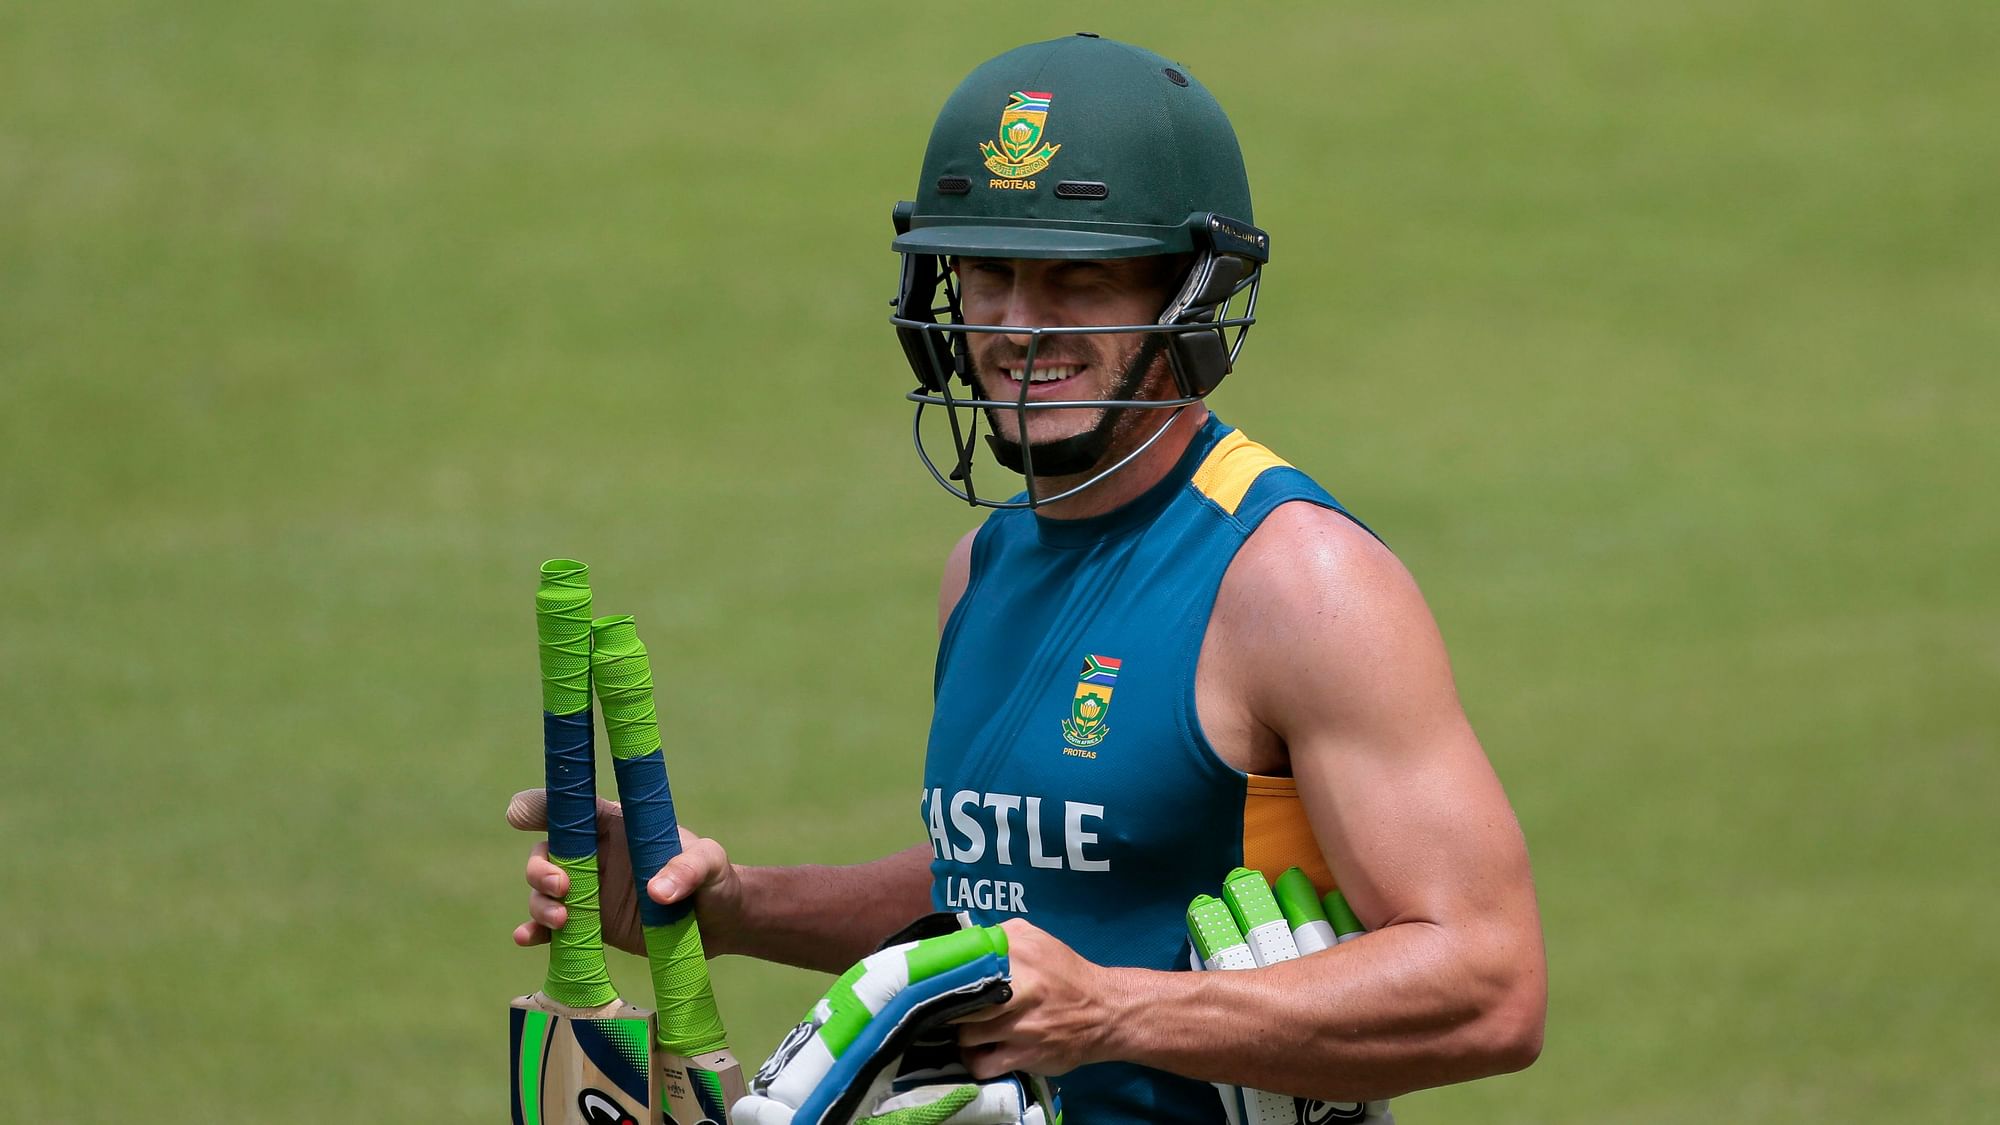 Faf du Plessis will lead South Africa at the 2019 ICC World Cup.